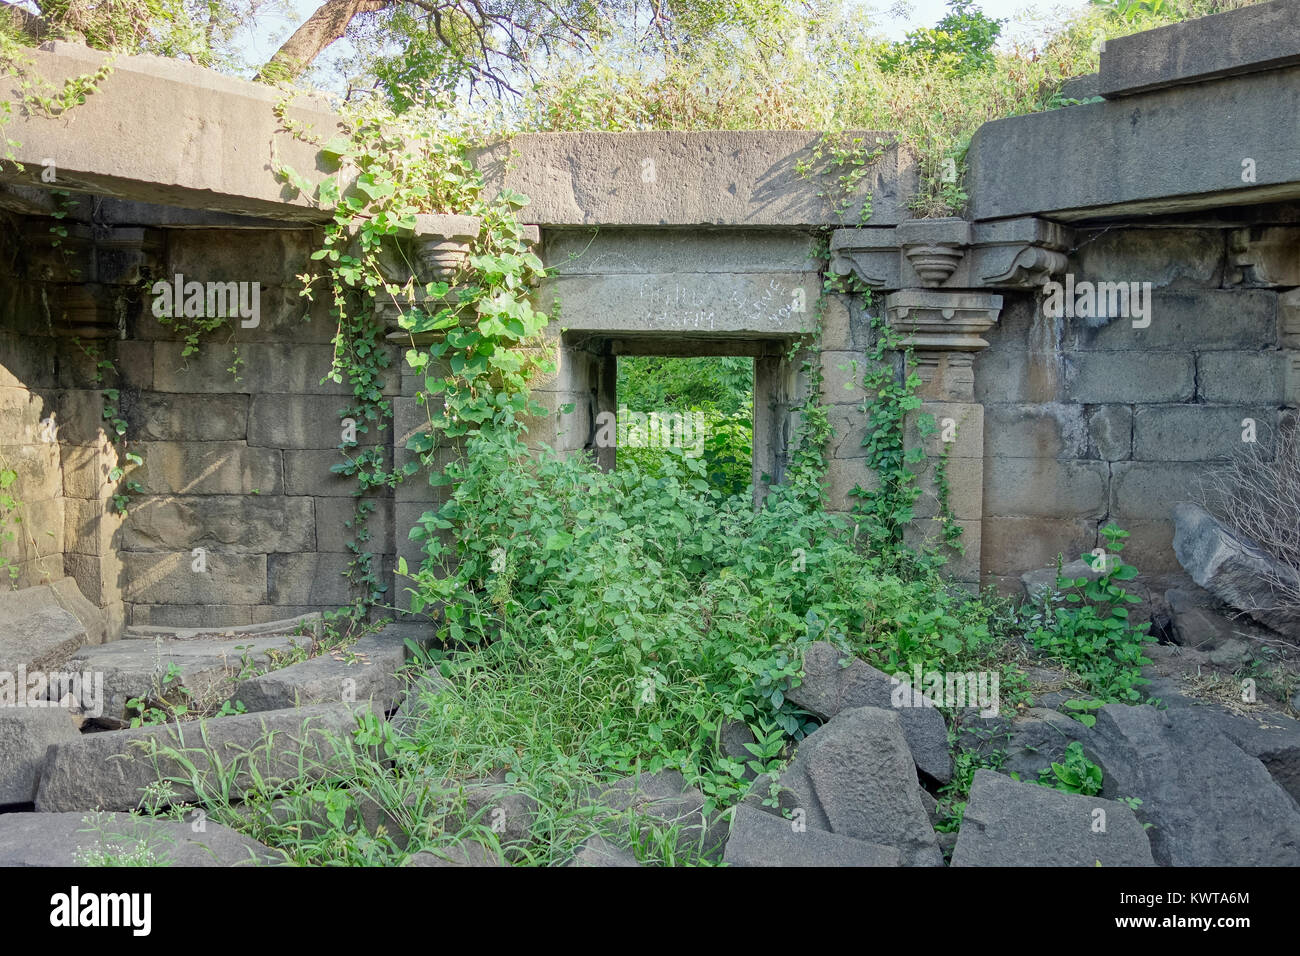 Vegetation-covered temples line the banks of the lake at Lonar in Maharashtra, India. Stock Photo